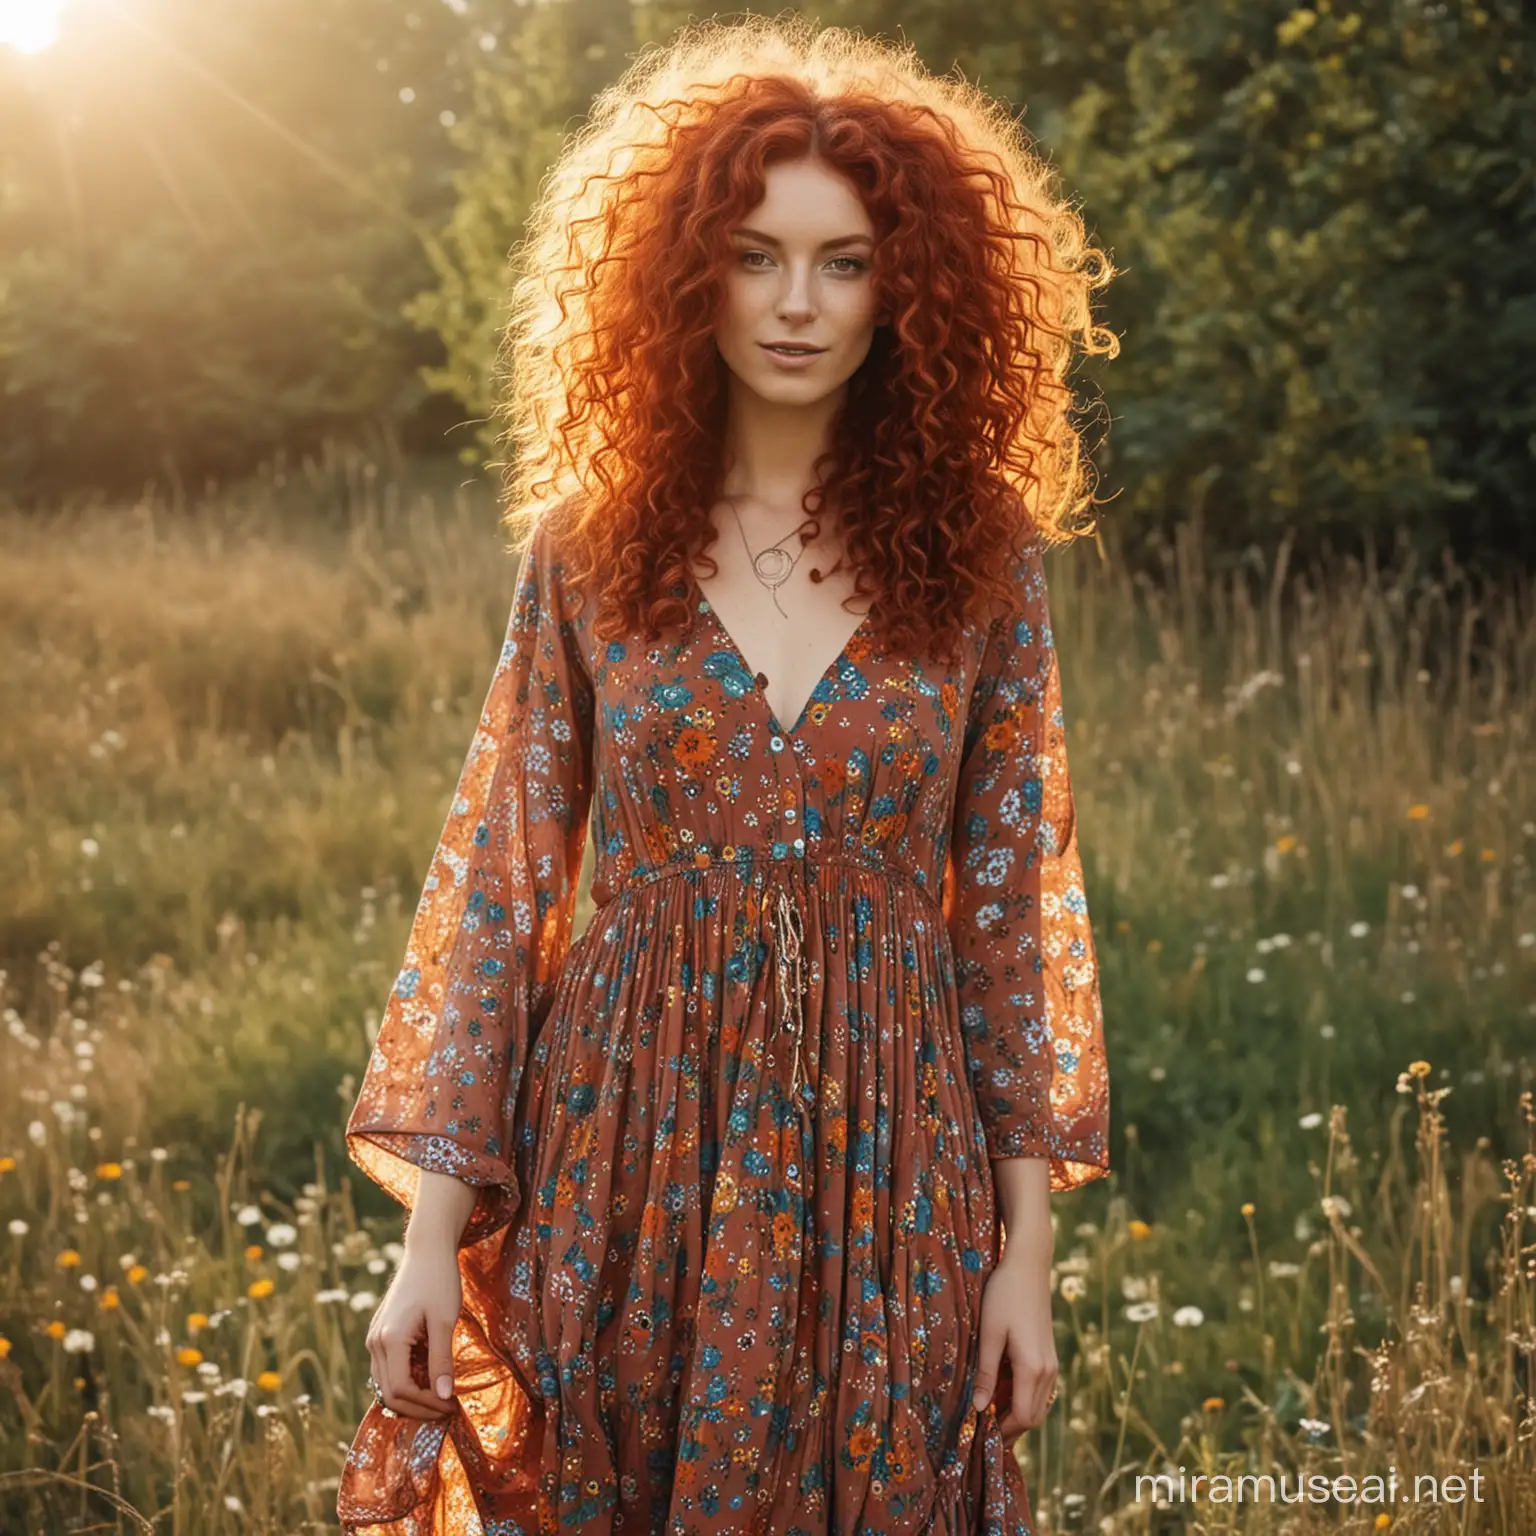 Bohemian Woman with Red Curly Hair in FullLength Dress